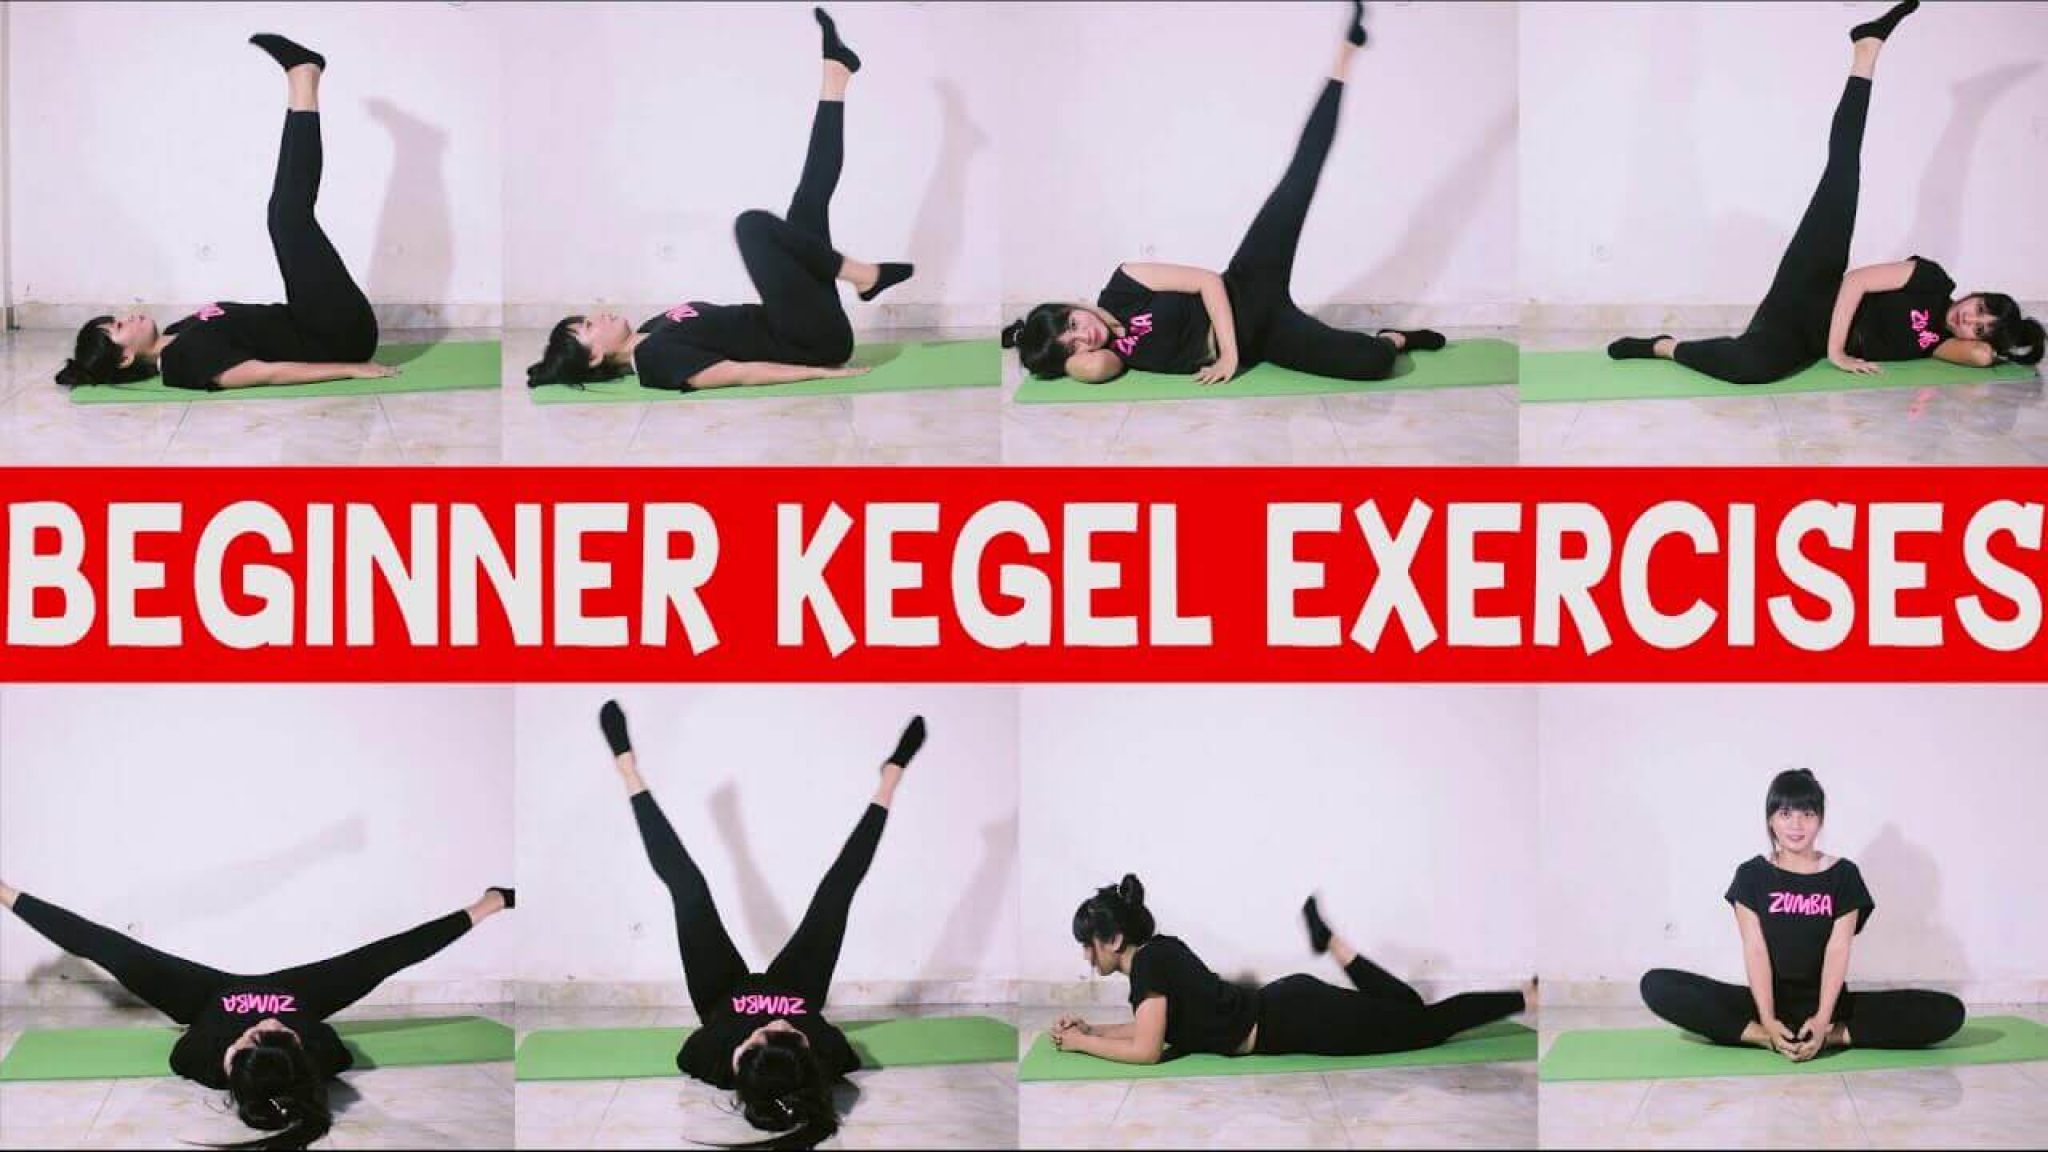 What Is The Correct Way To Do A Kegel Exercise